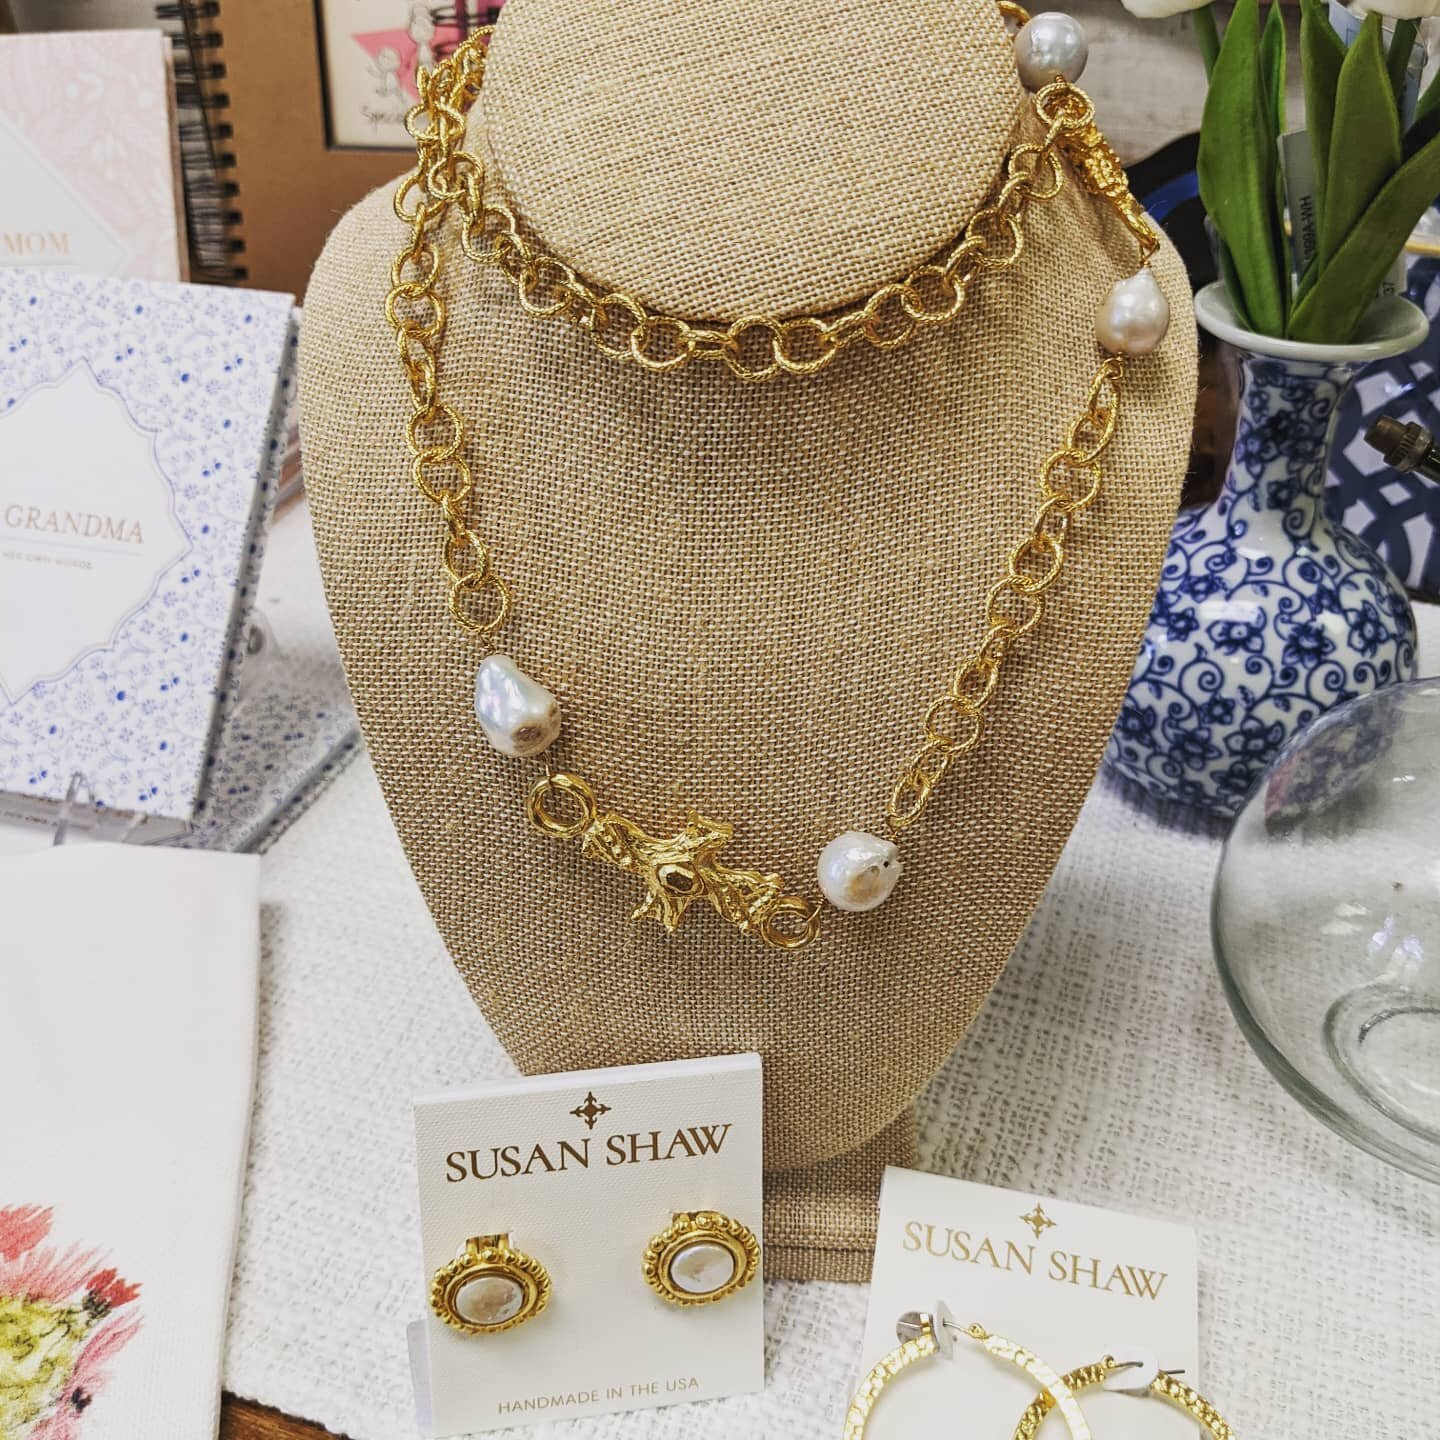 Mother's Day is 1 week from tomorrow!  Stop by and we'll help you pick out a special gift!
.
.
.
.
#mothersday #christiangifts #parkavenuewp #allsaintswinterpark #shopwinterpark